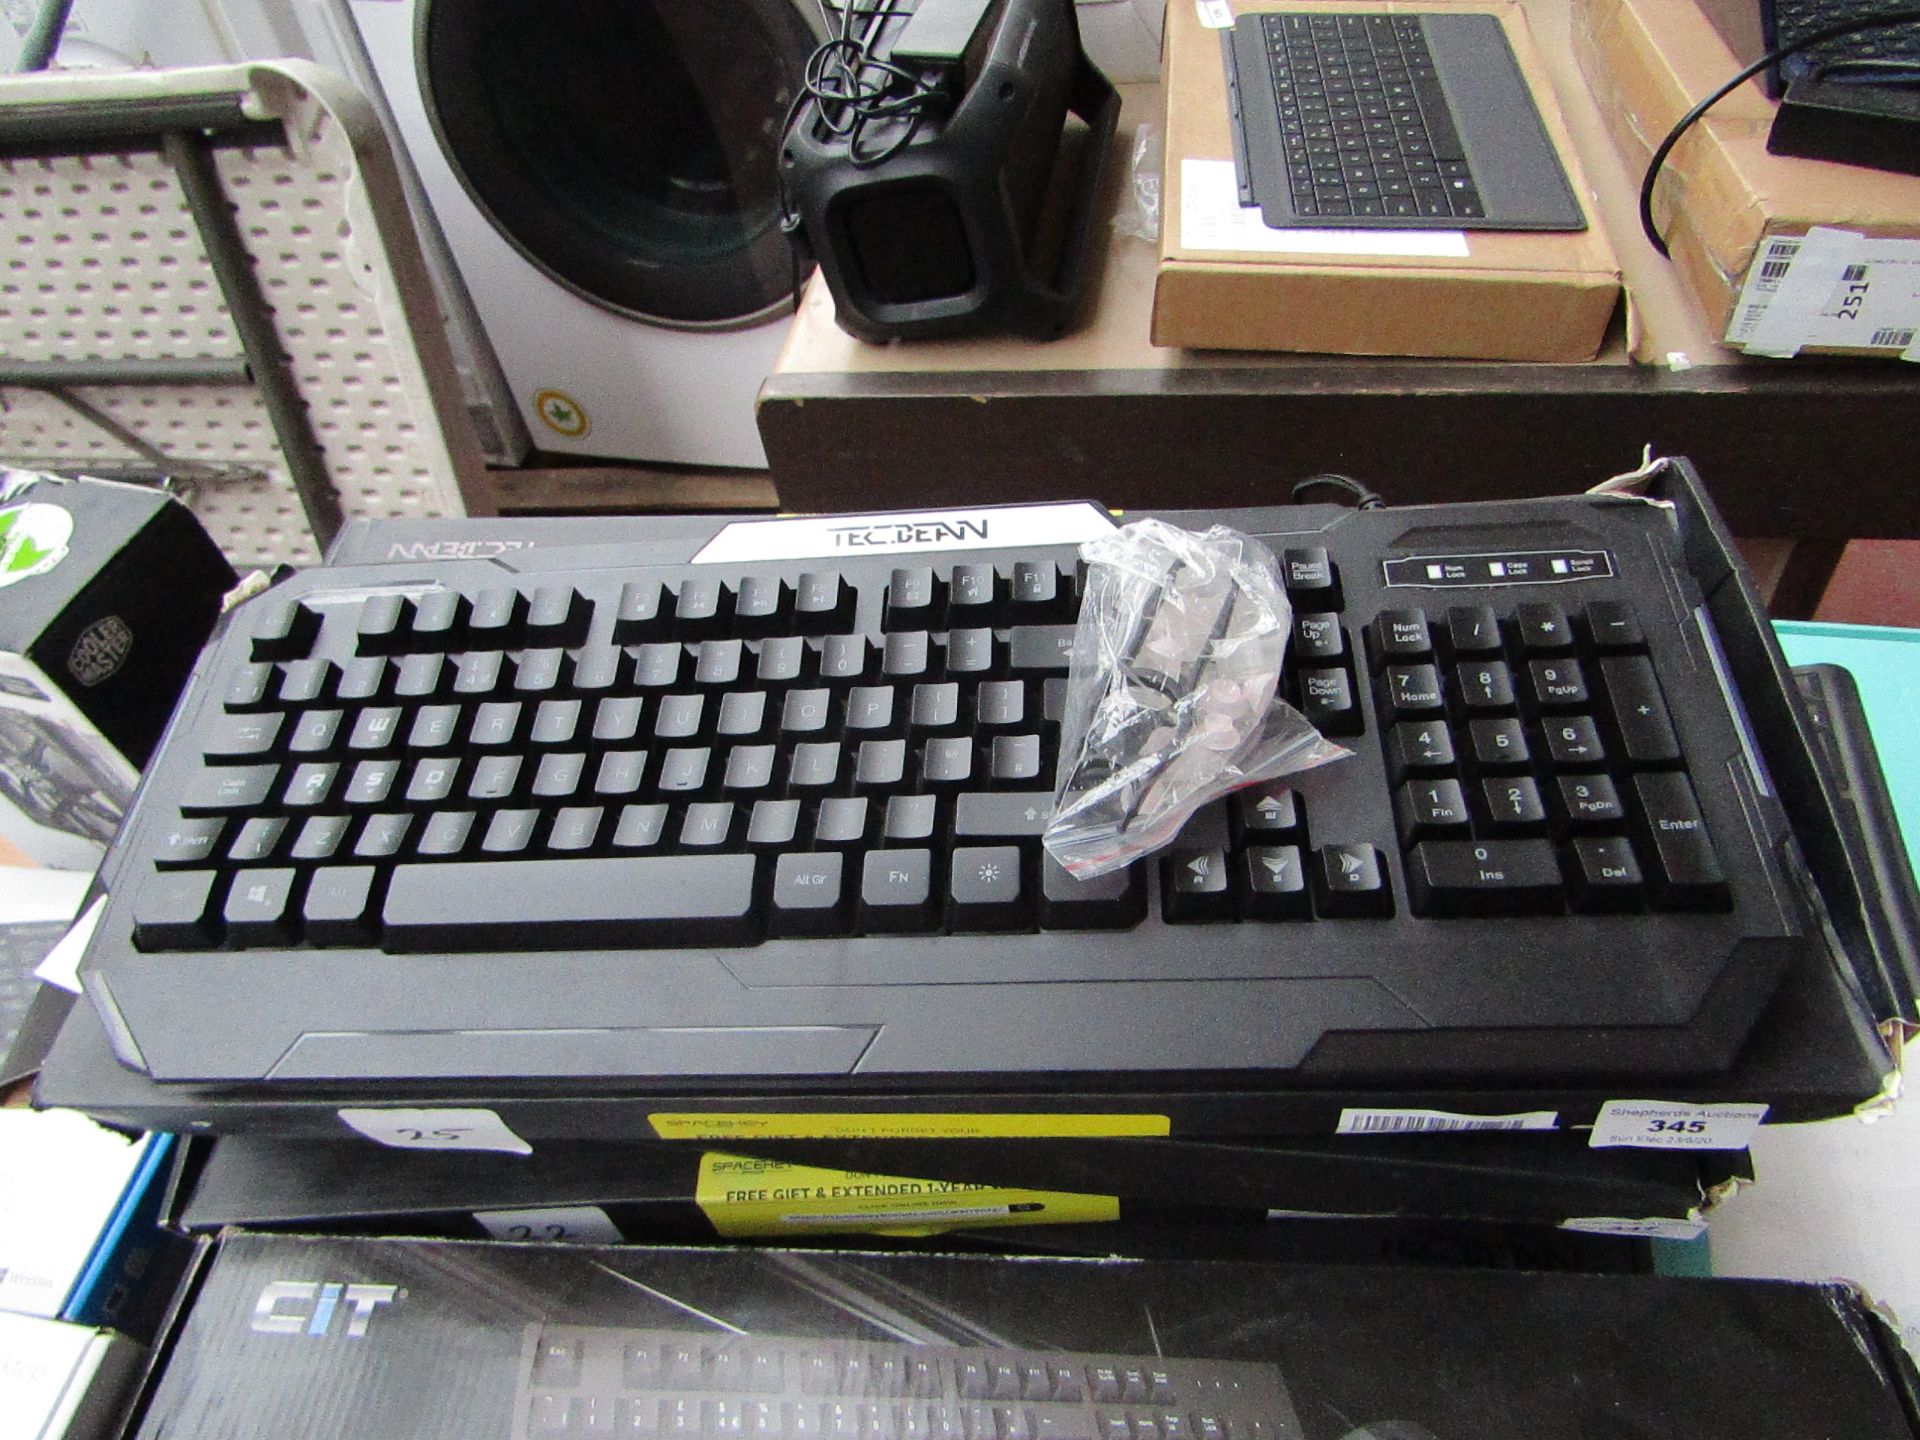 Spacekey Tech Bean USB gaming keyboard, unchecked and boxed